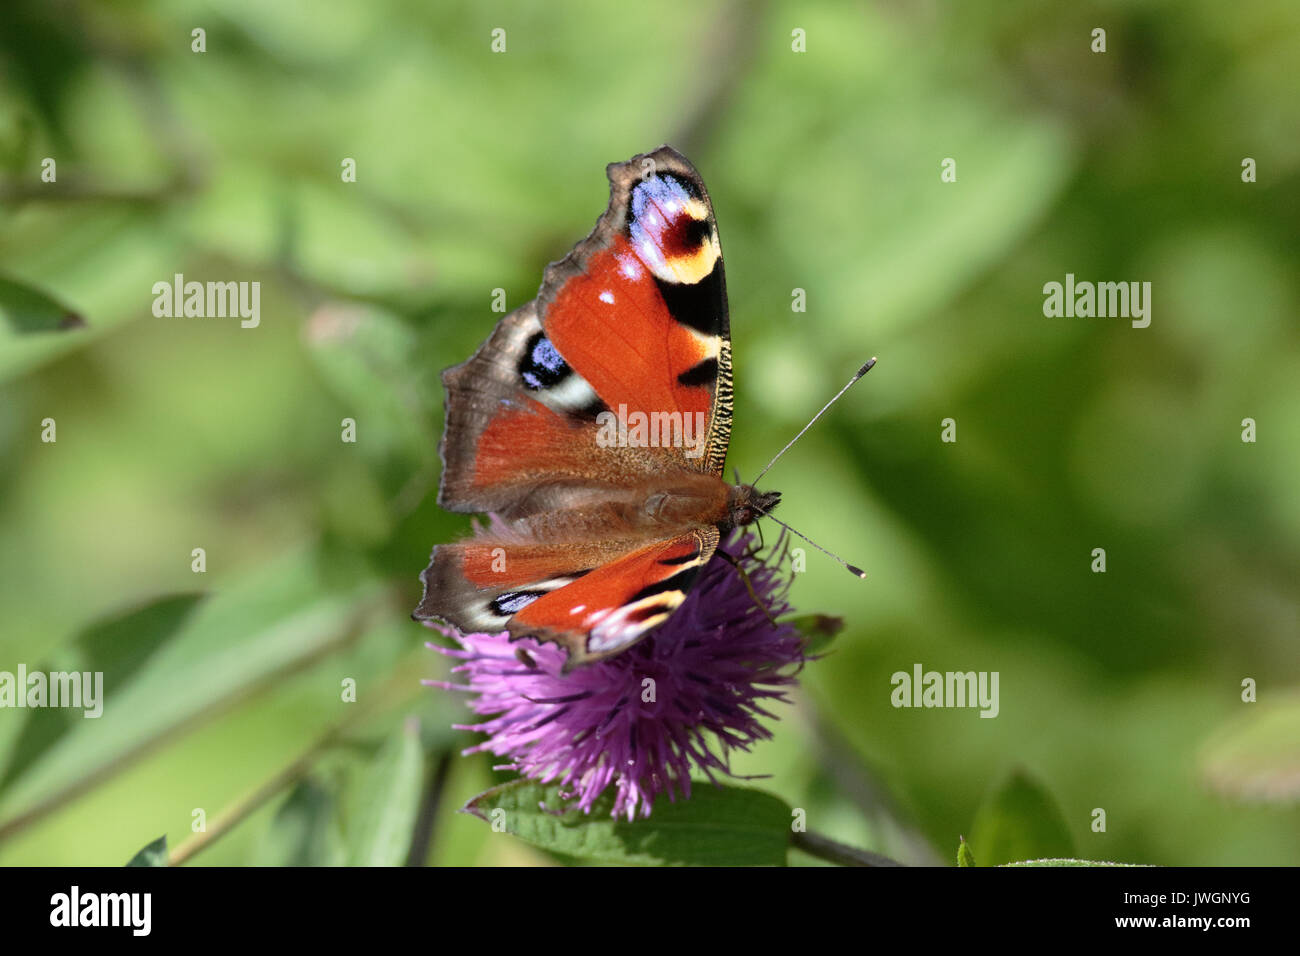 Peacock Butterfly on Knapweed Stock Photo